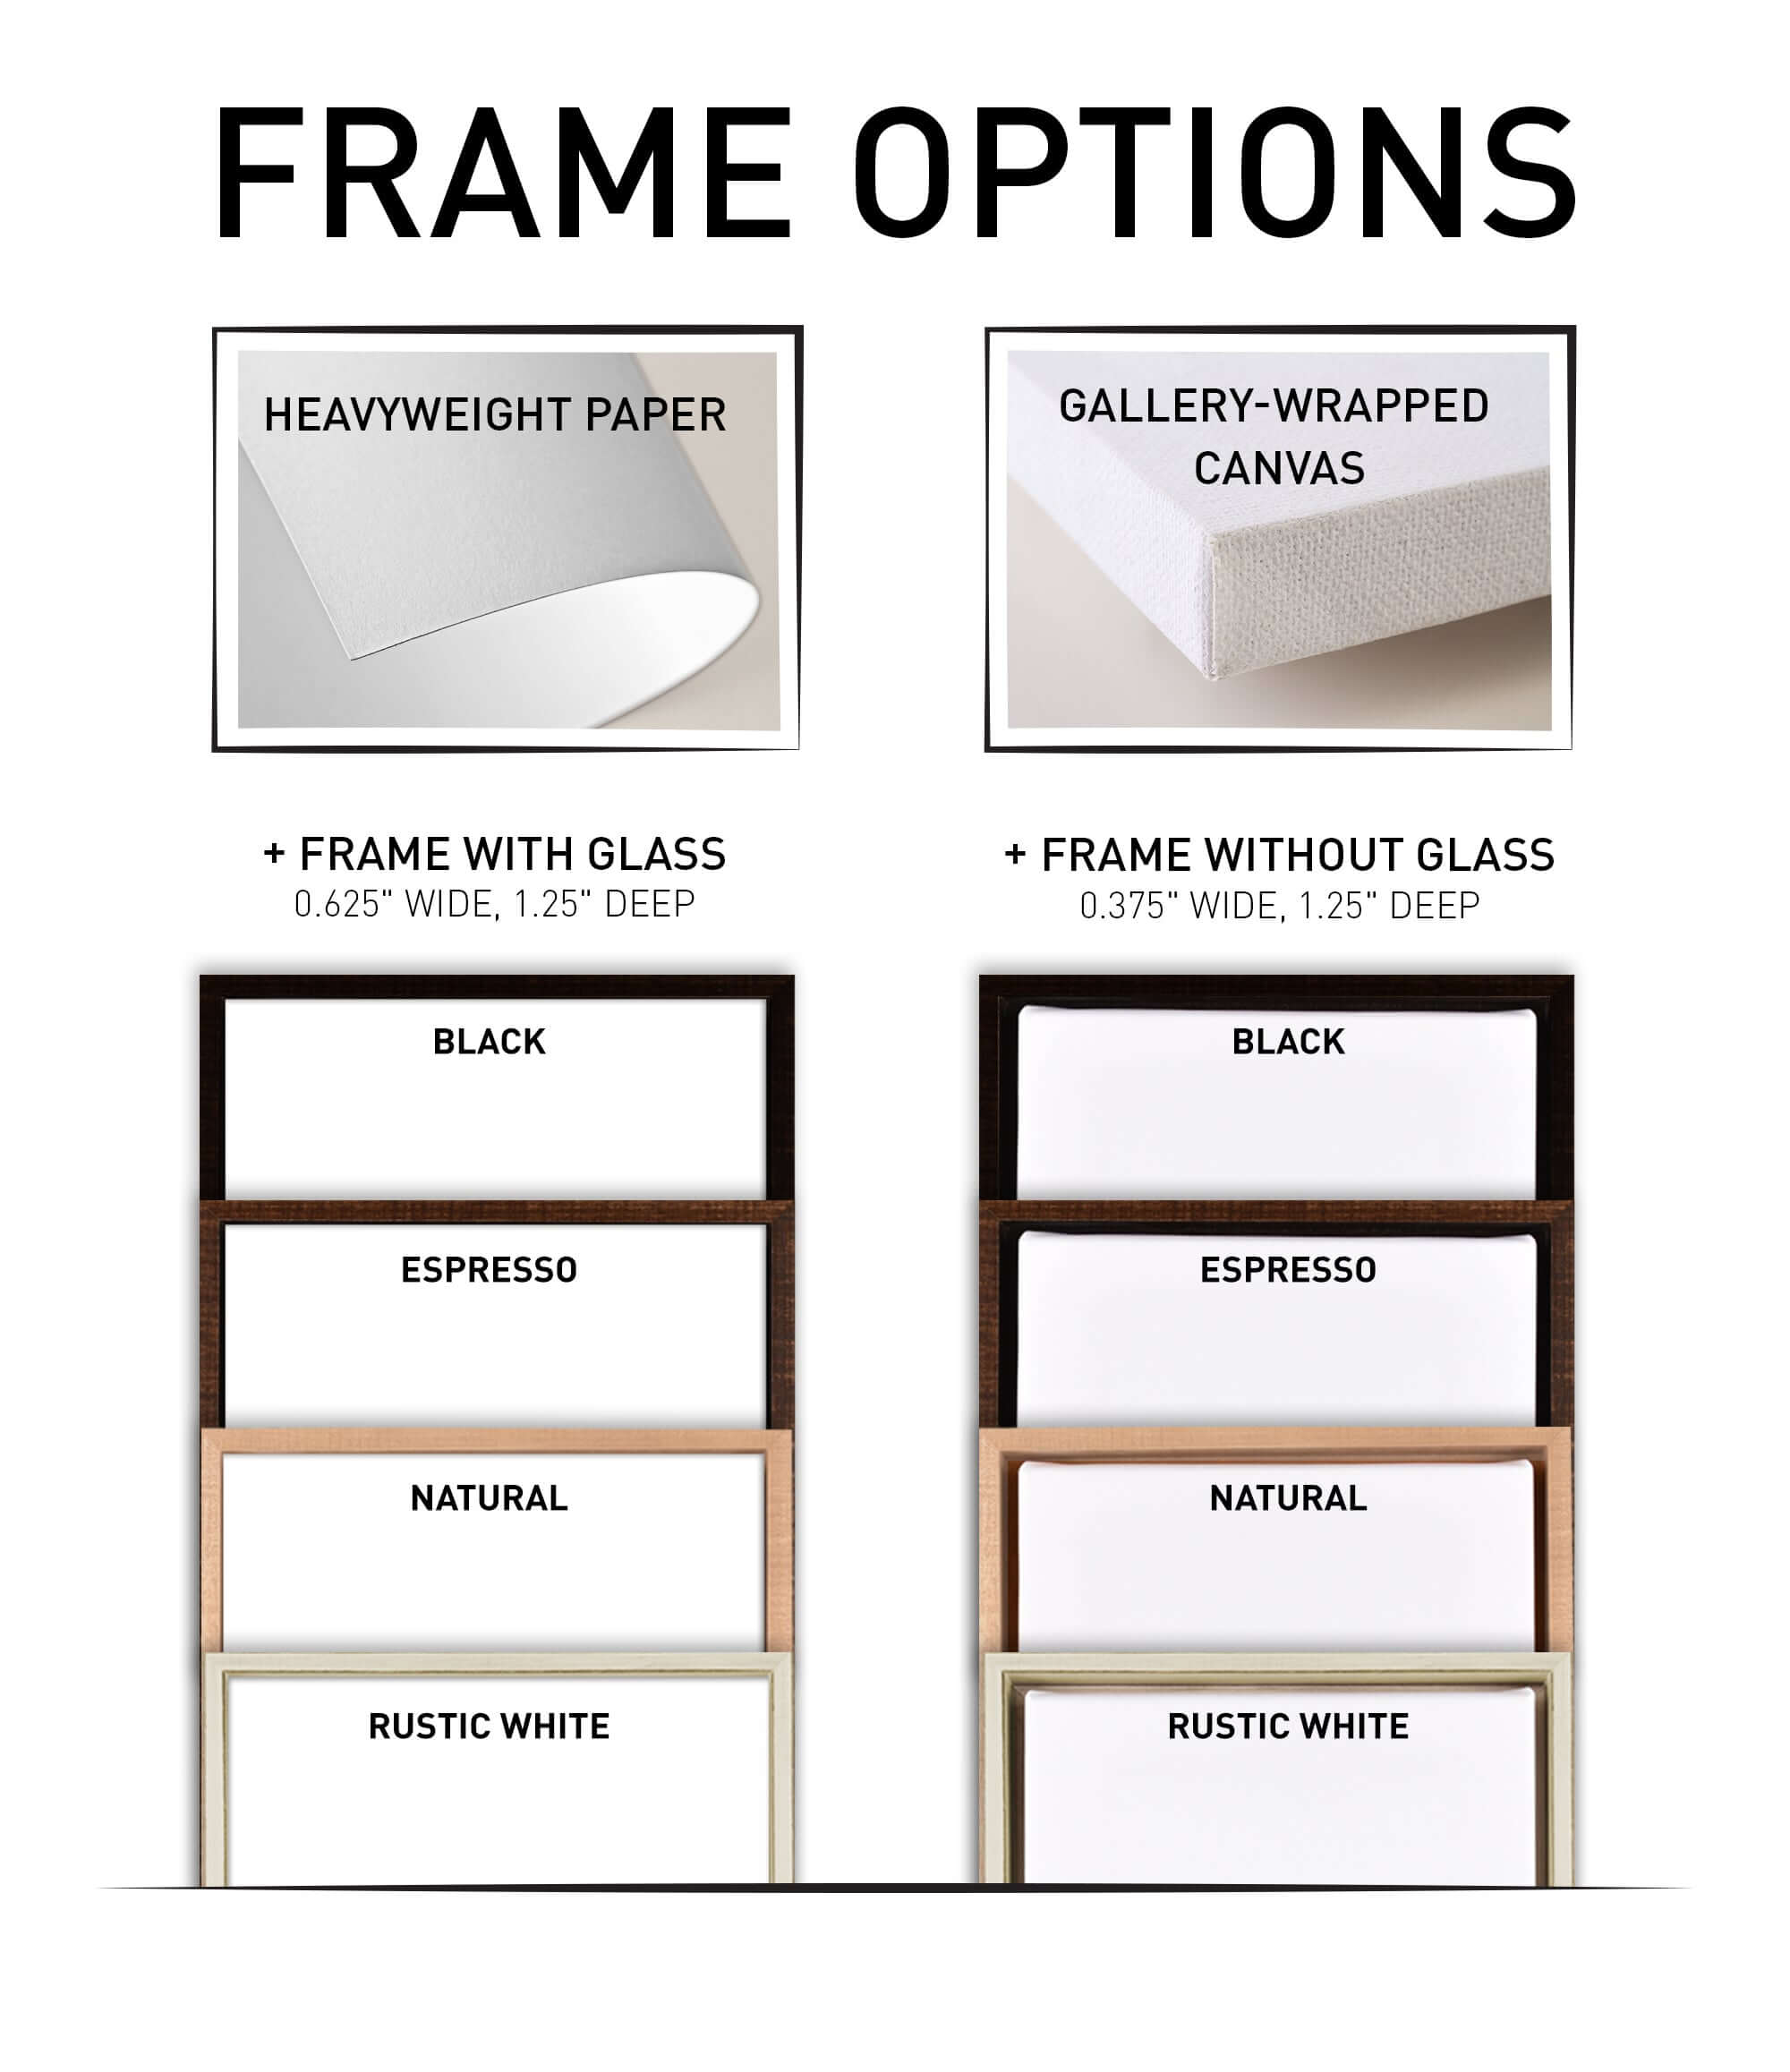 the frame options for a mattress